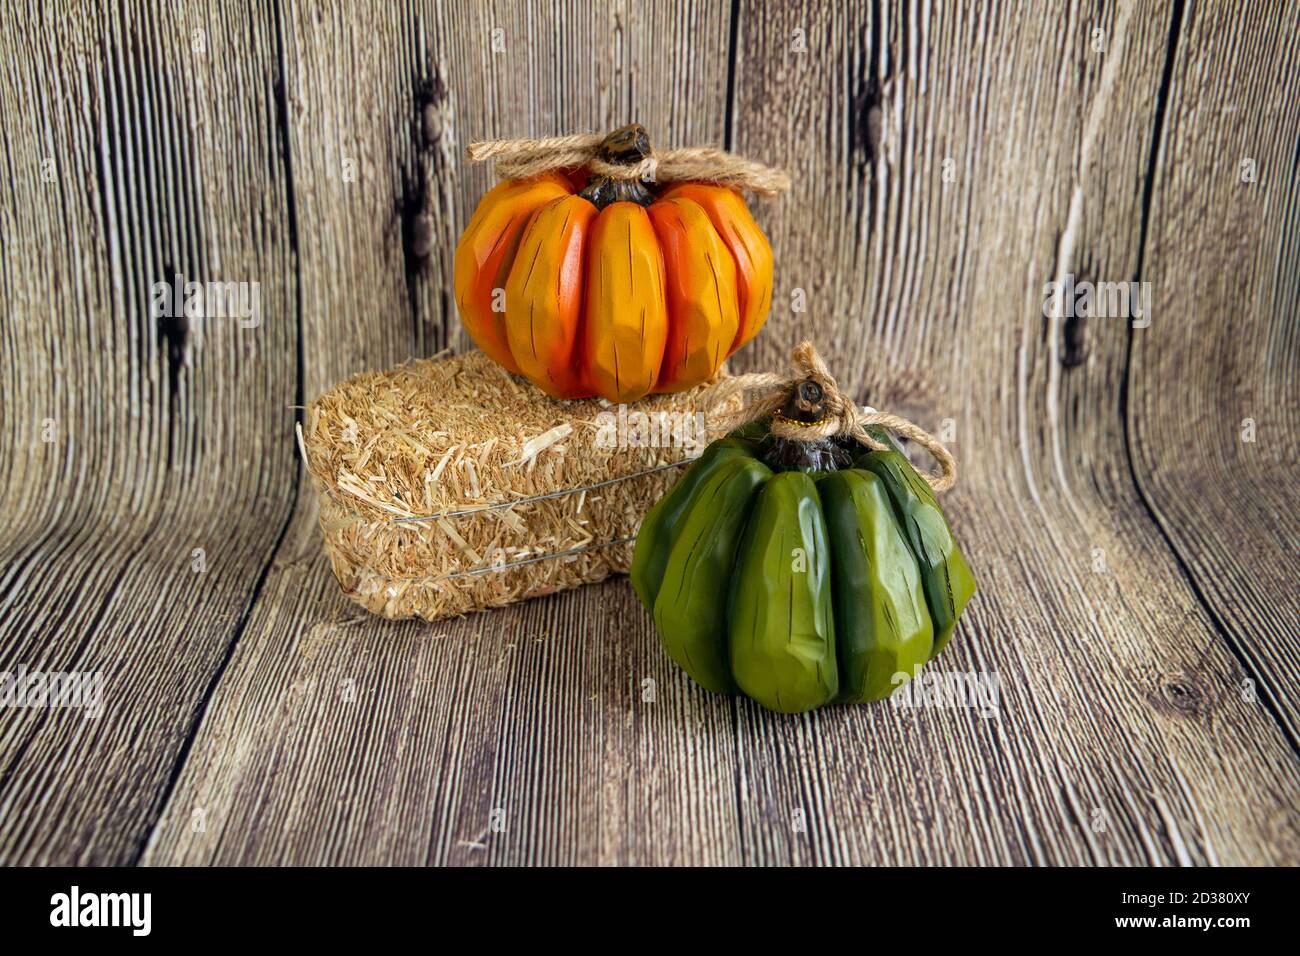 Decorative green and orange pumpkin and a hey stack isolated on the wood background. Holidays Stock Photo